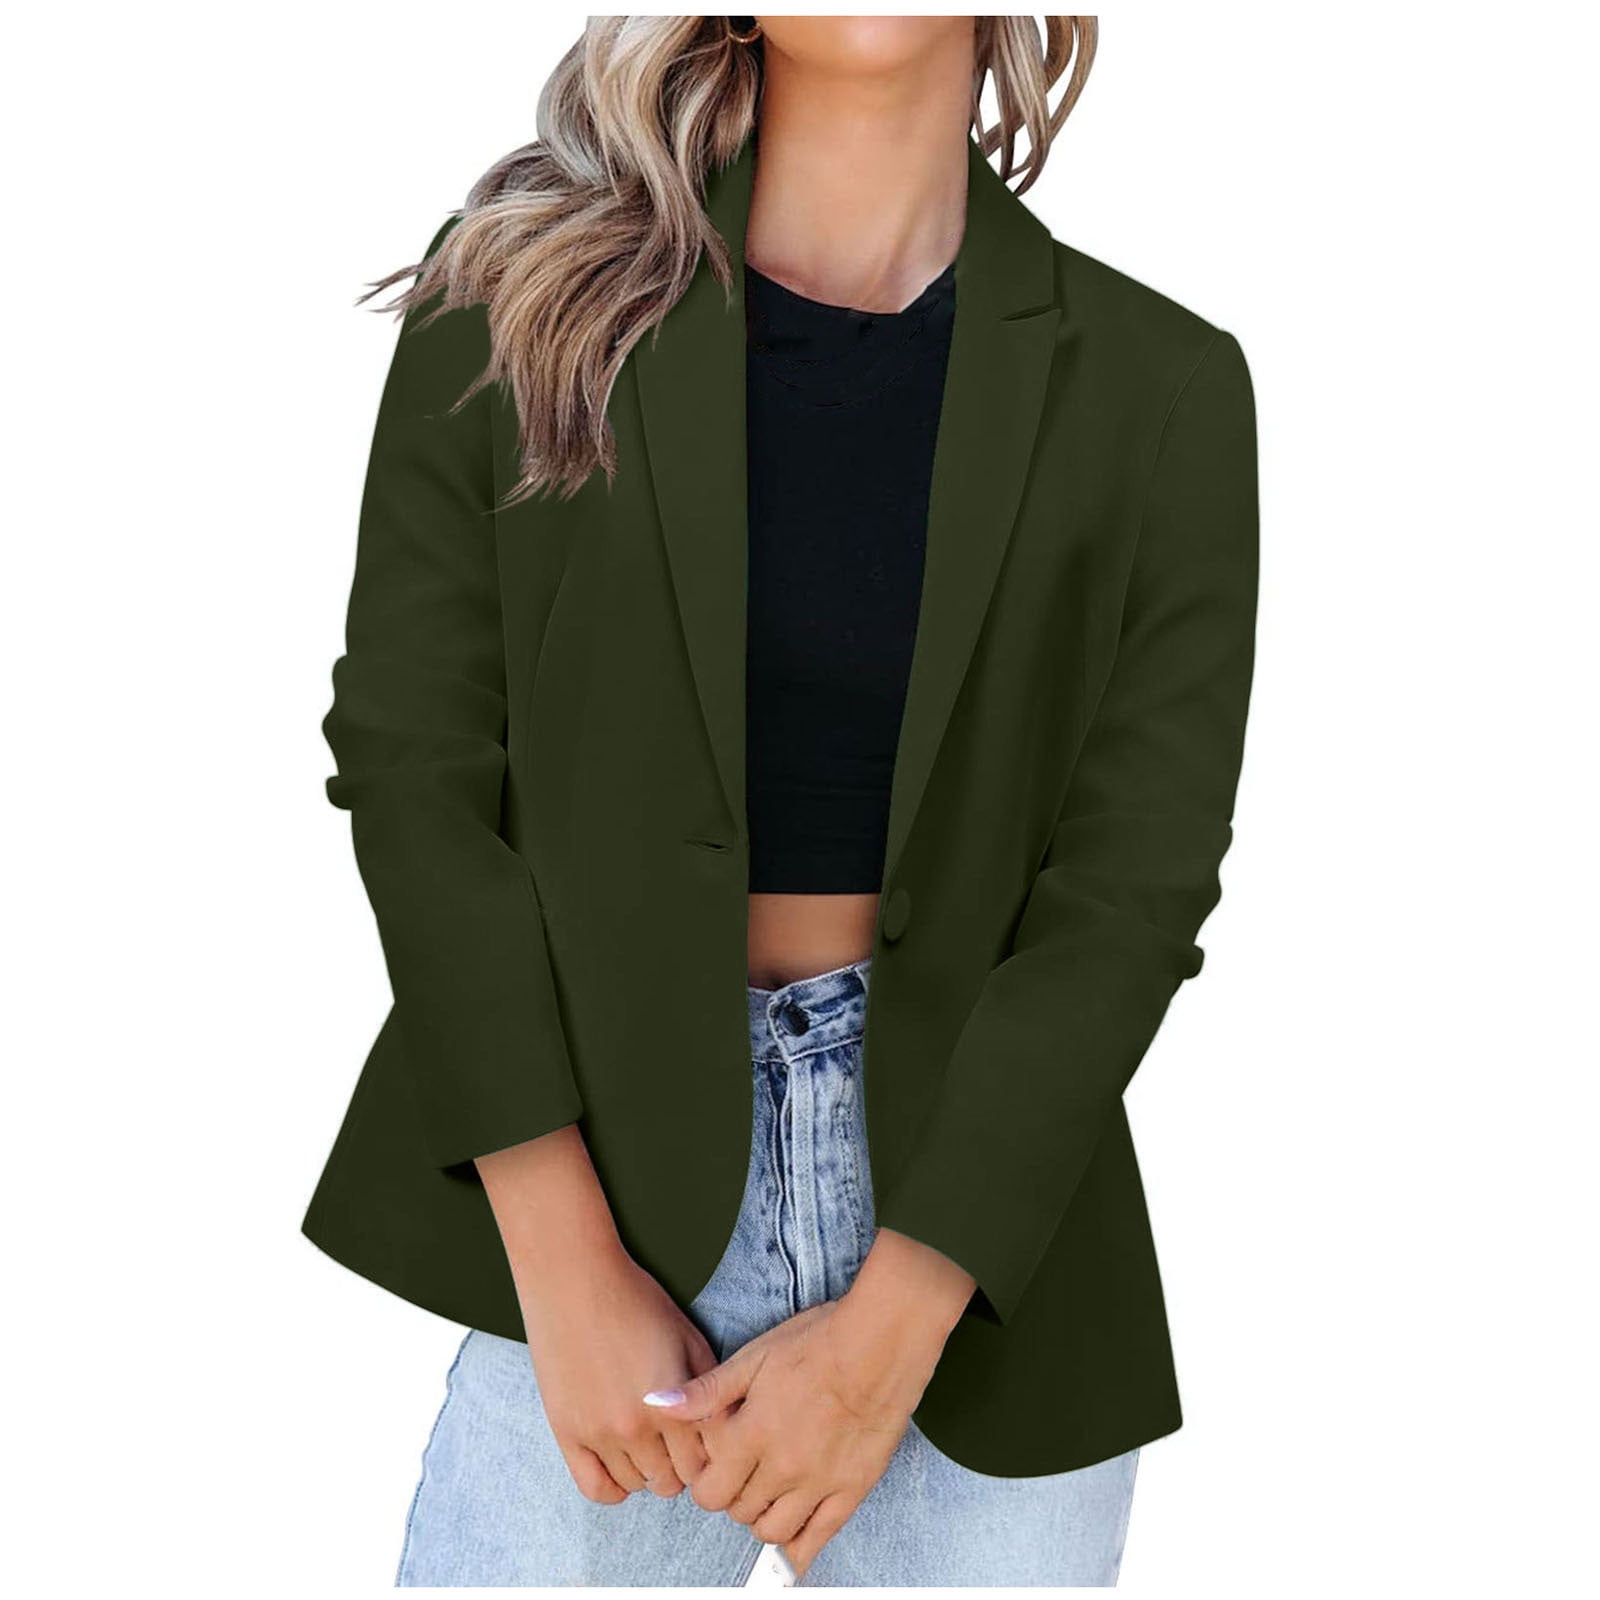 Blazer for Womens Long Sleeves Business Suit Jackets Fashion Solid Color  Open Front Cardigan Coat with Pockets 